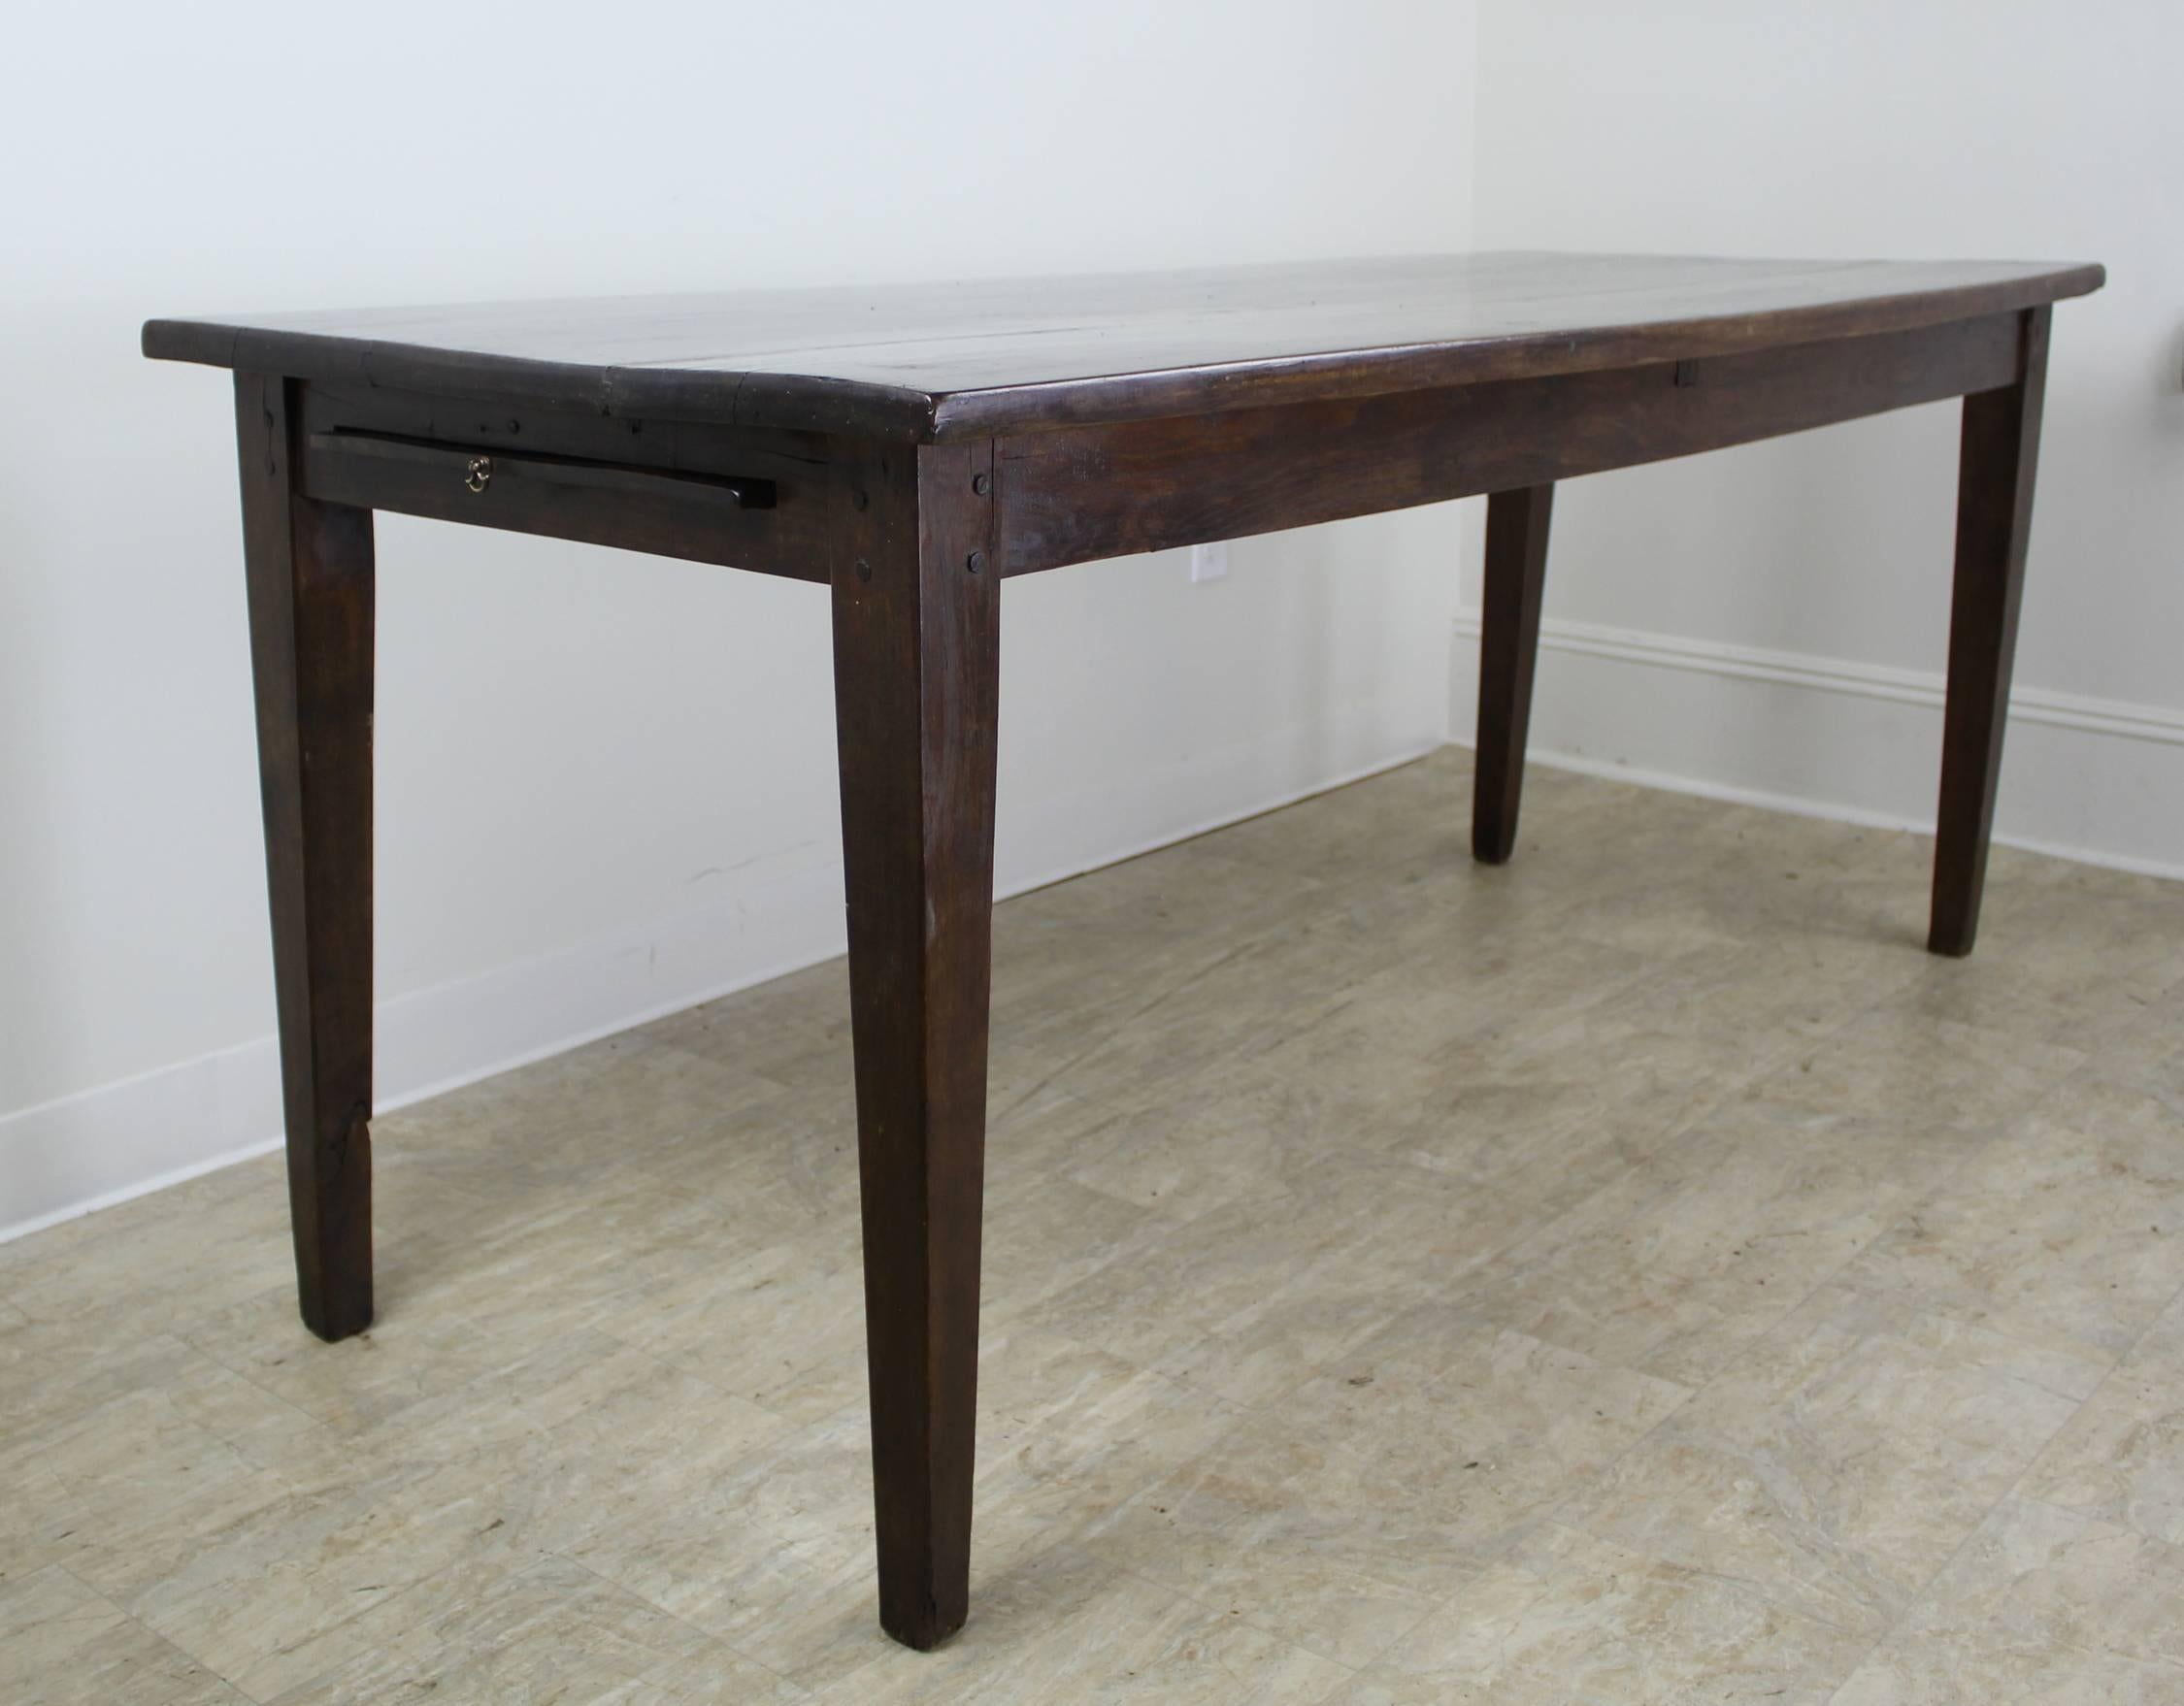 A very Classic farm table, beautiful chestnut wood in the perfect color, with very nice graining and patina. Because the legs are all the way to the ends of the top, the configuration maximizes seating, allowing three chairs on each long side, with